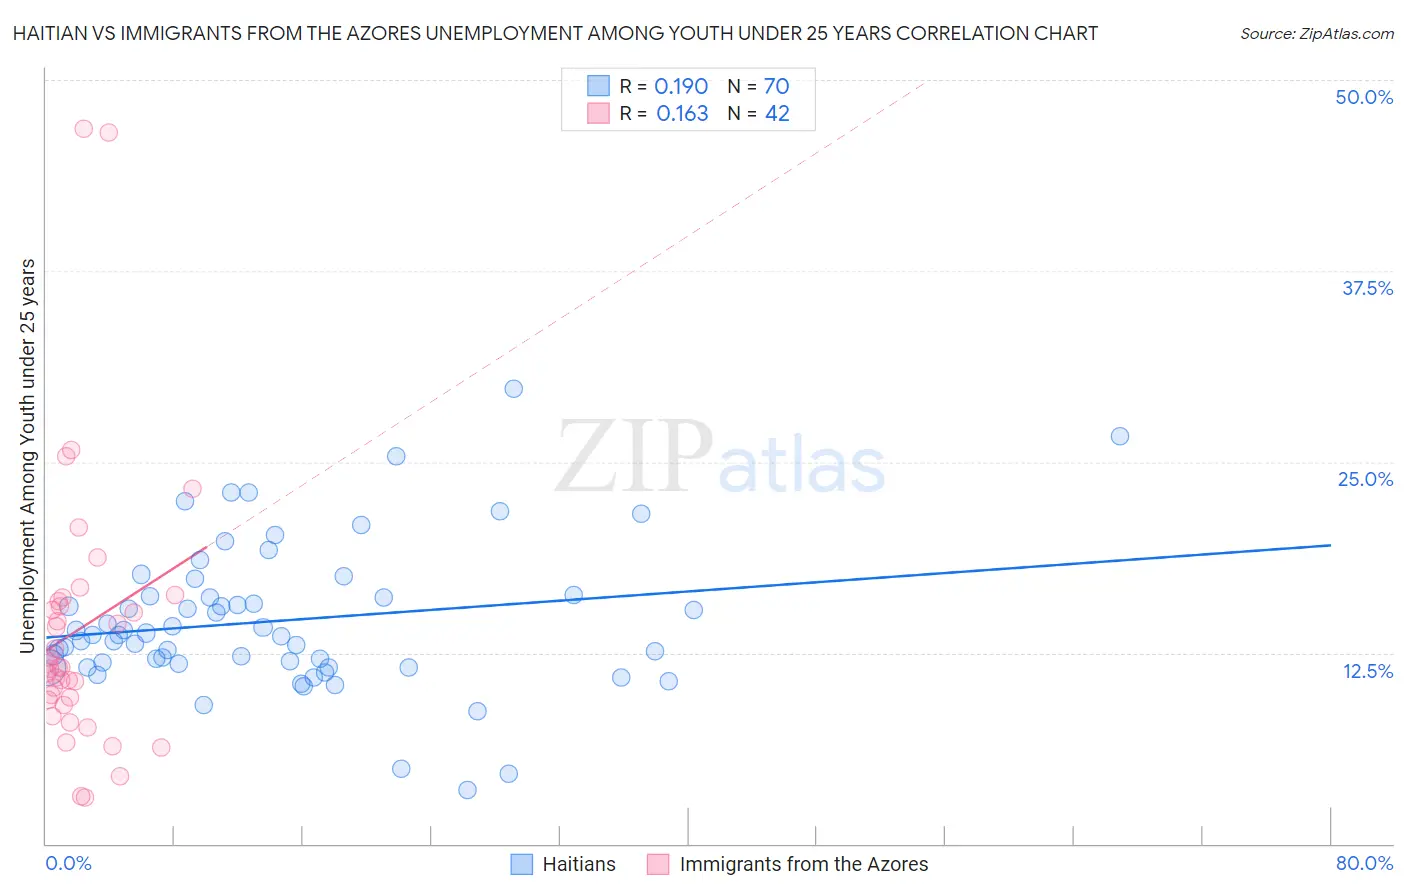 Haitian vs Immigrants from the Azores Unemployment Among Youth under 25 years